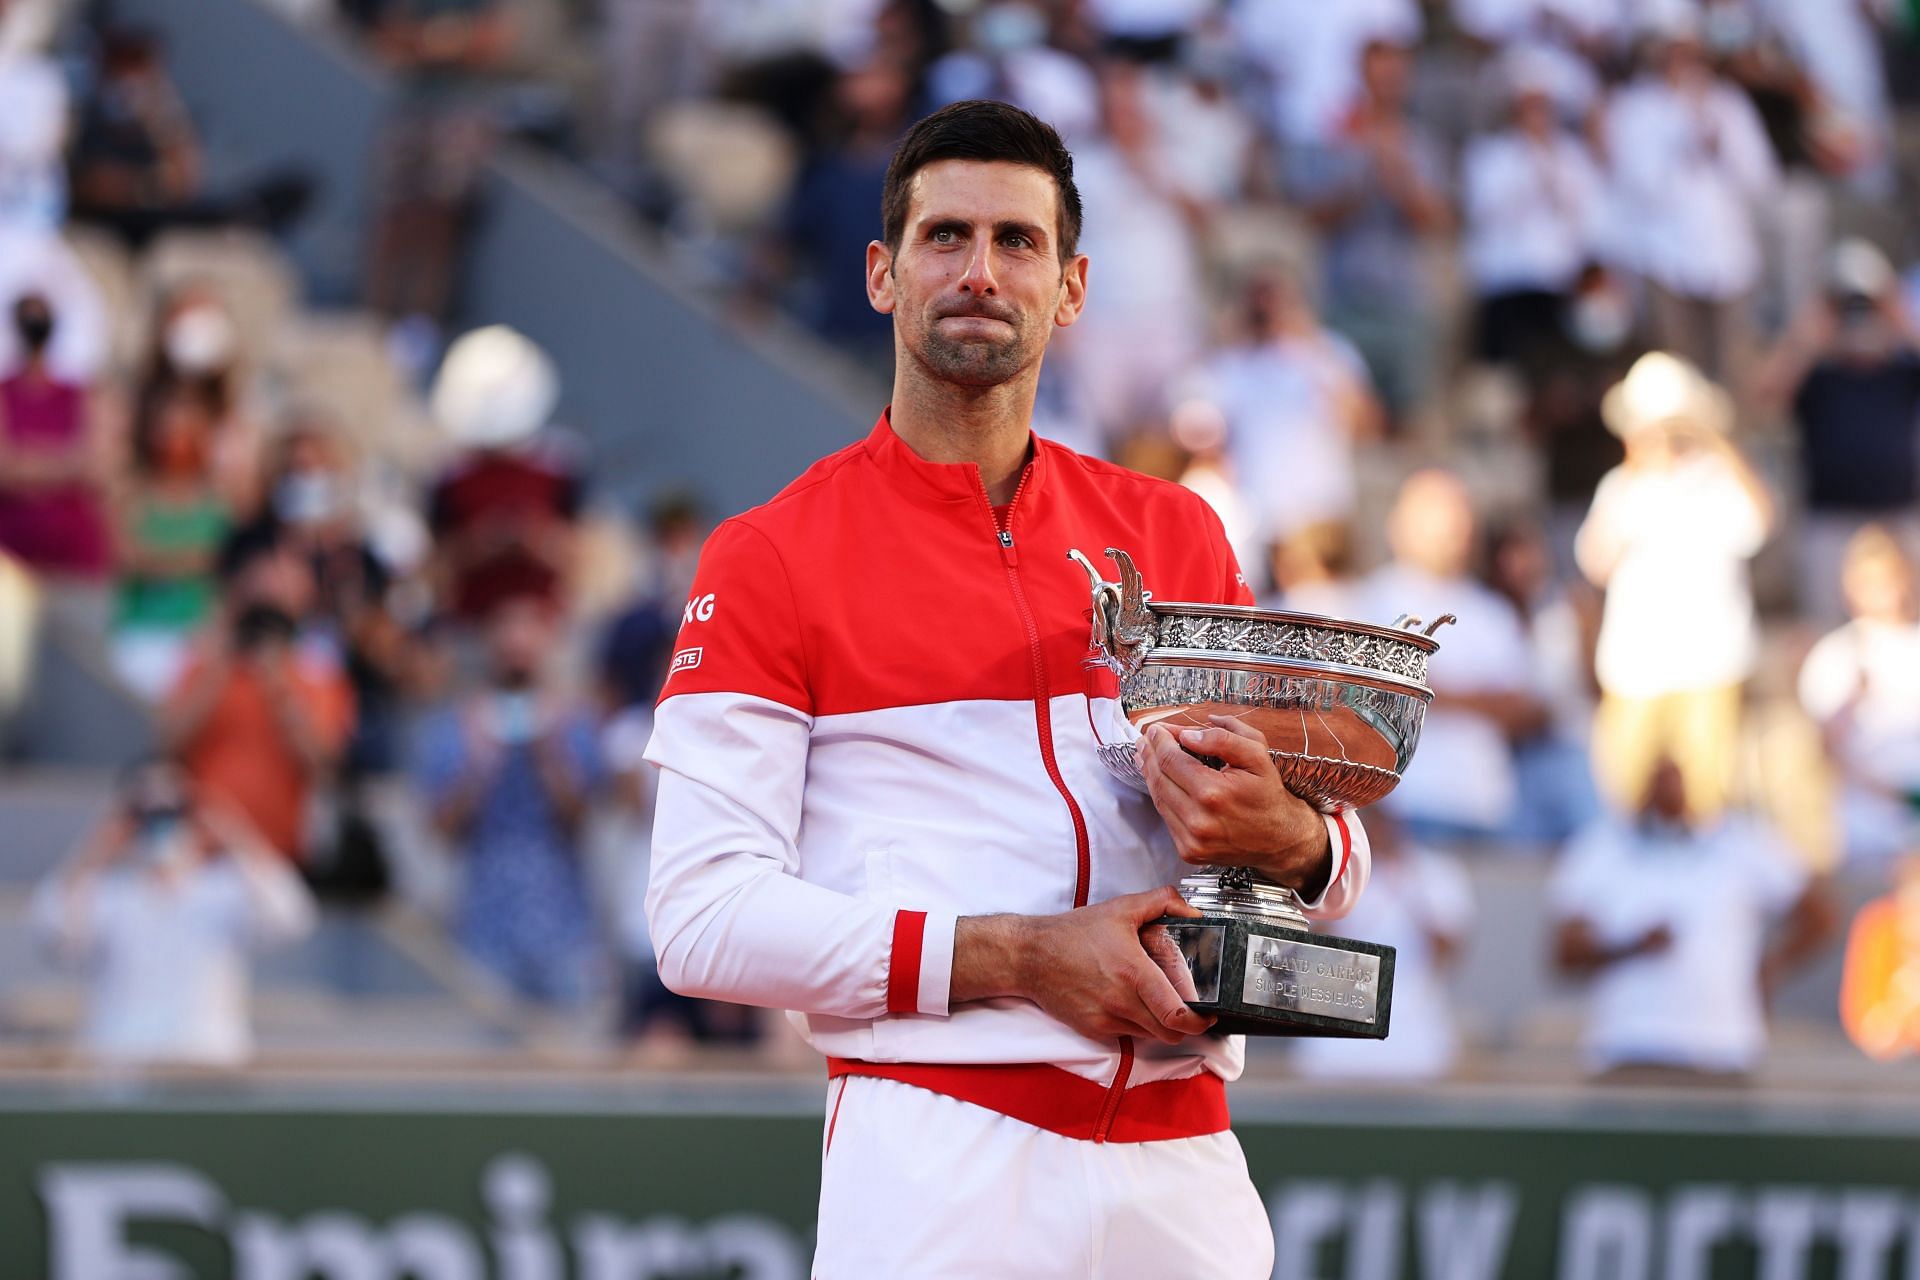 French Open 2022 prize money breakdown How much do the winners get?